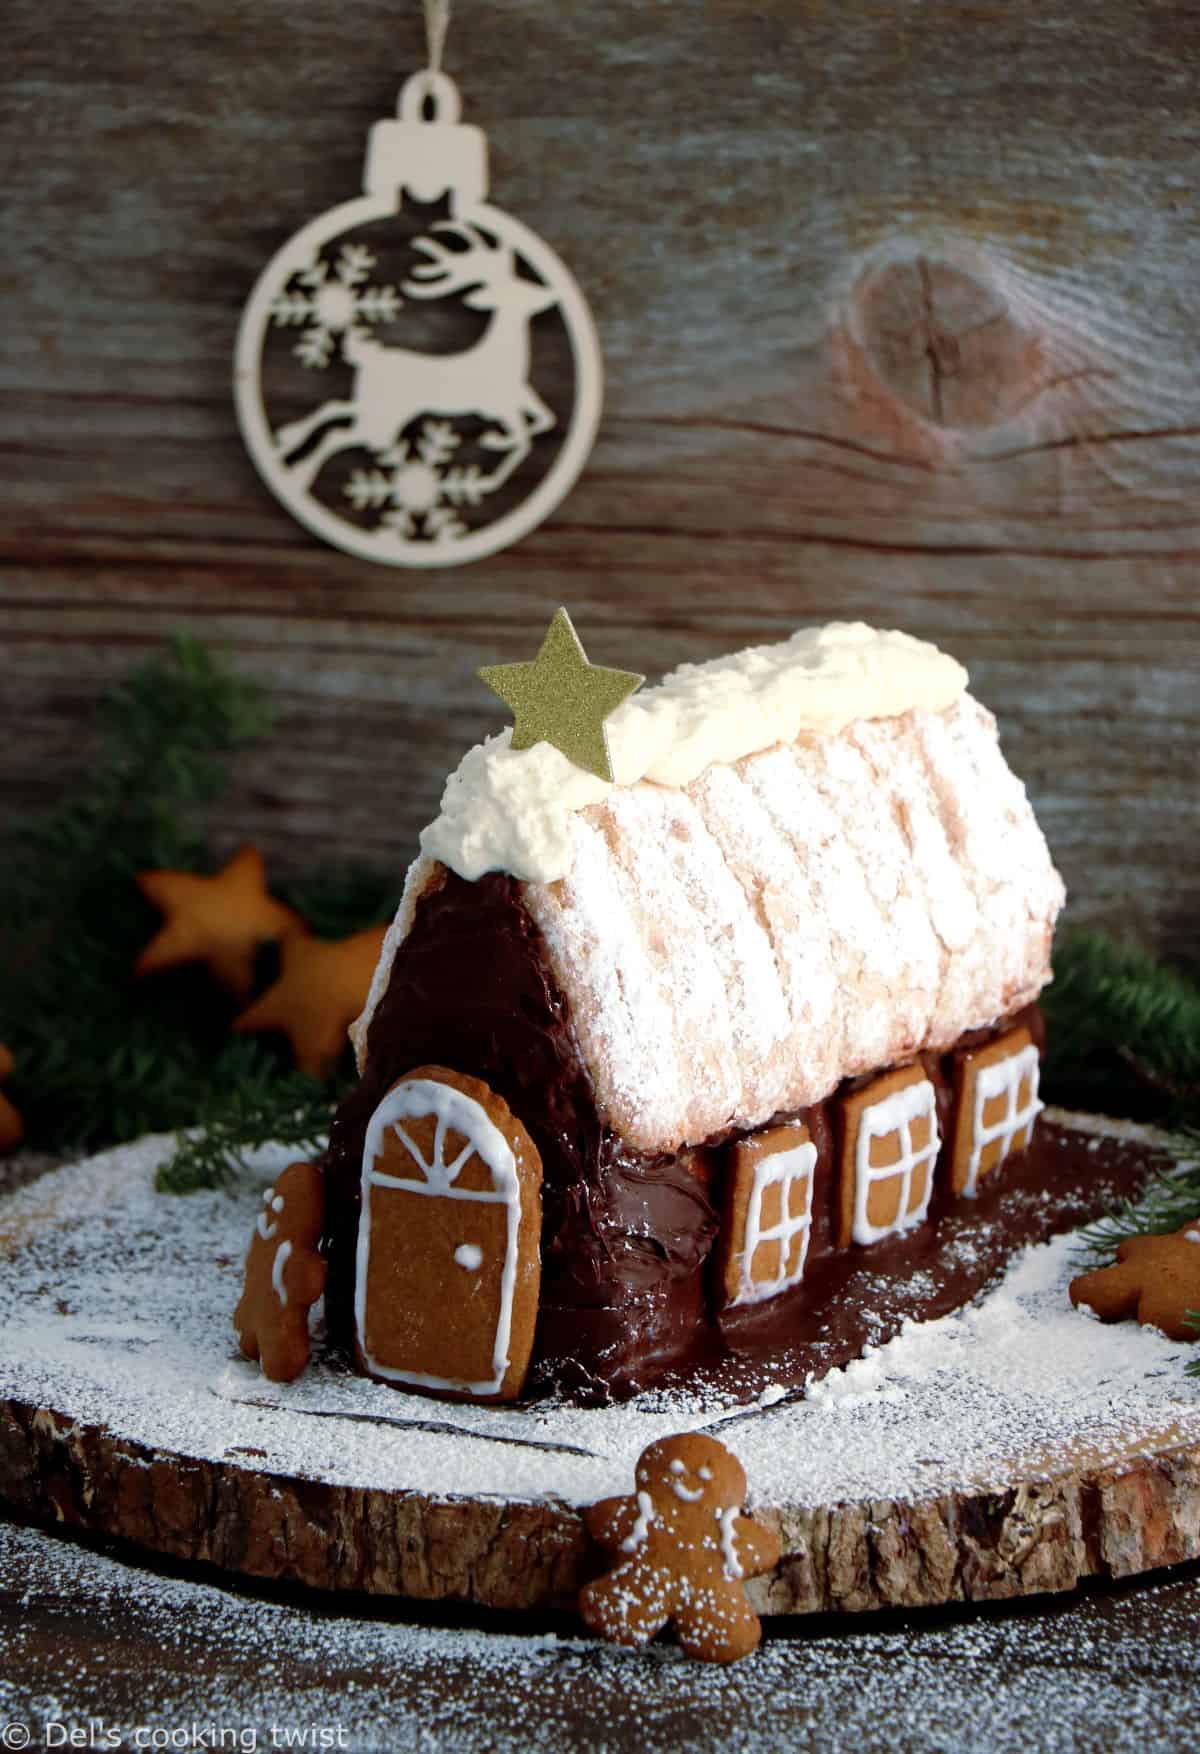 Tiramisu gingerbread house cake features a simple tiramisu in the shape of a house decorated with gingerbread. The perfect Christmas dessert!